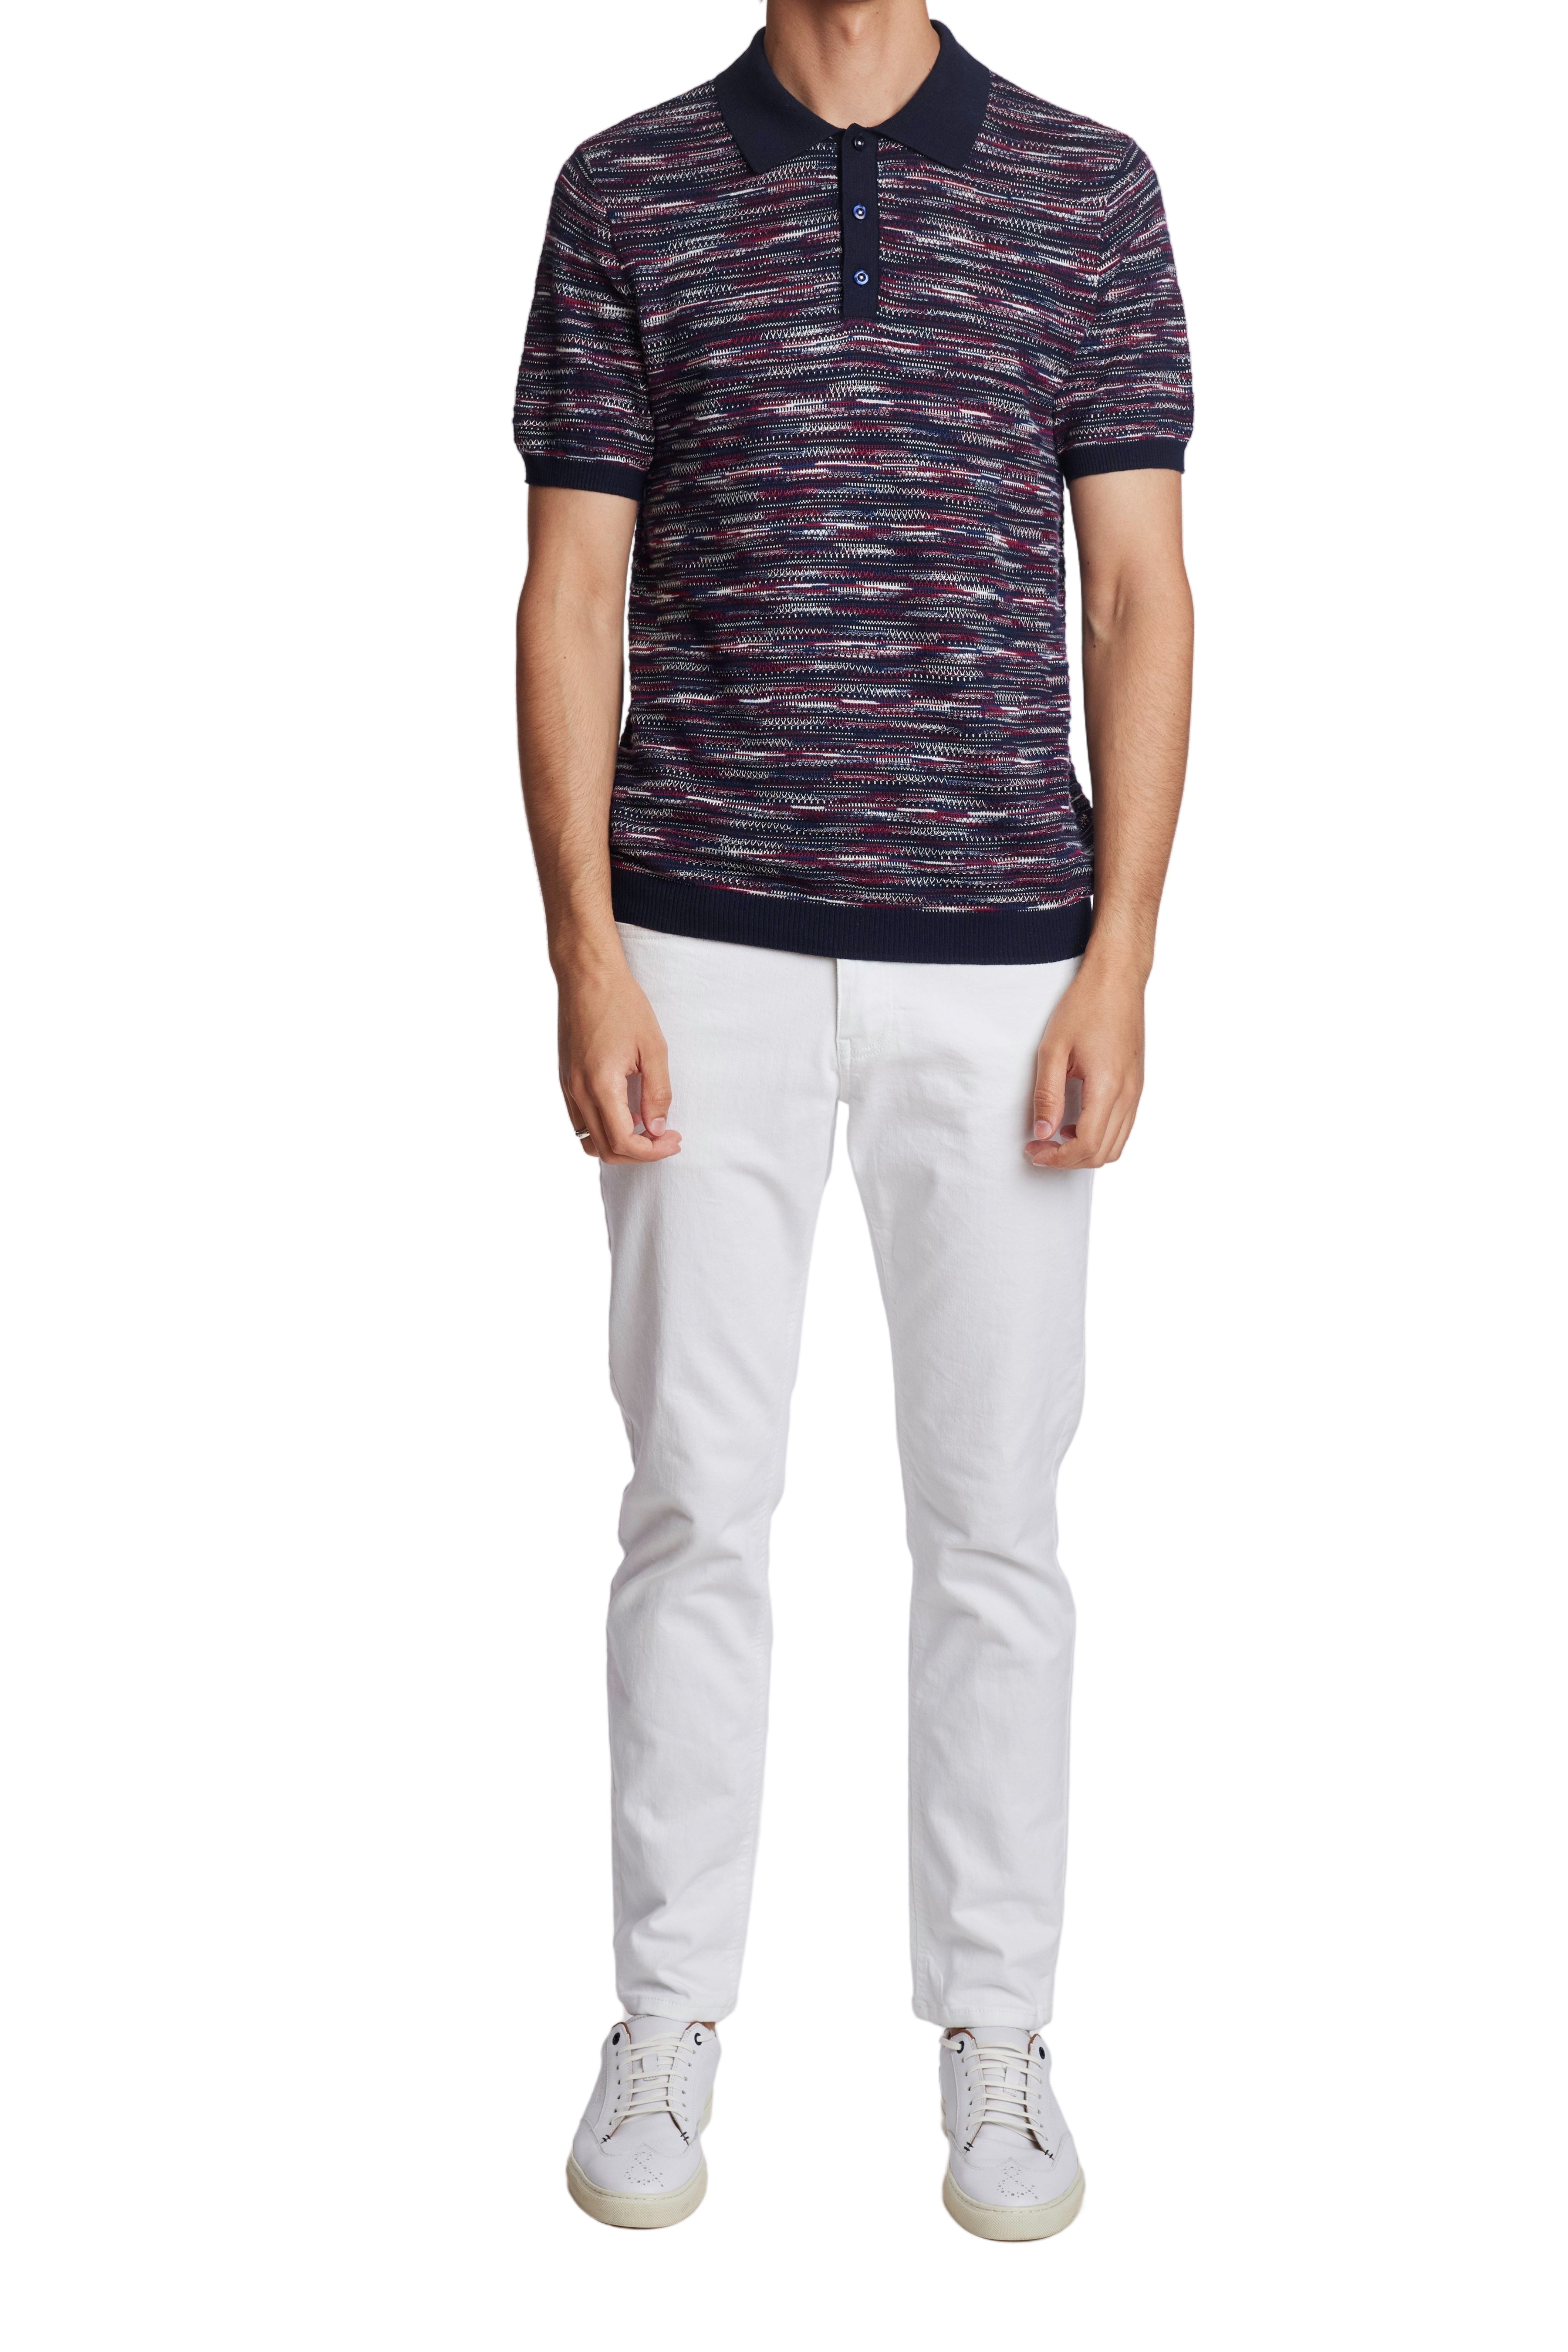 3 Button Knitted Polo - Red White Navy Multi